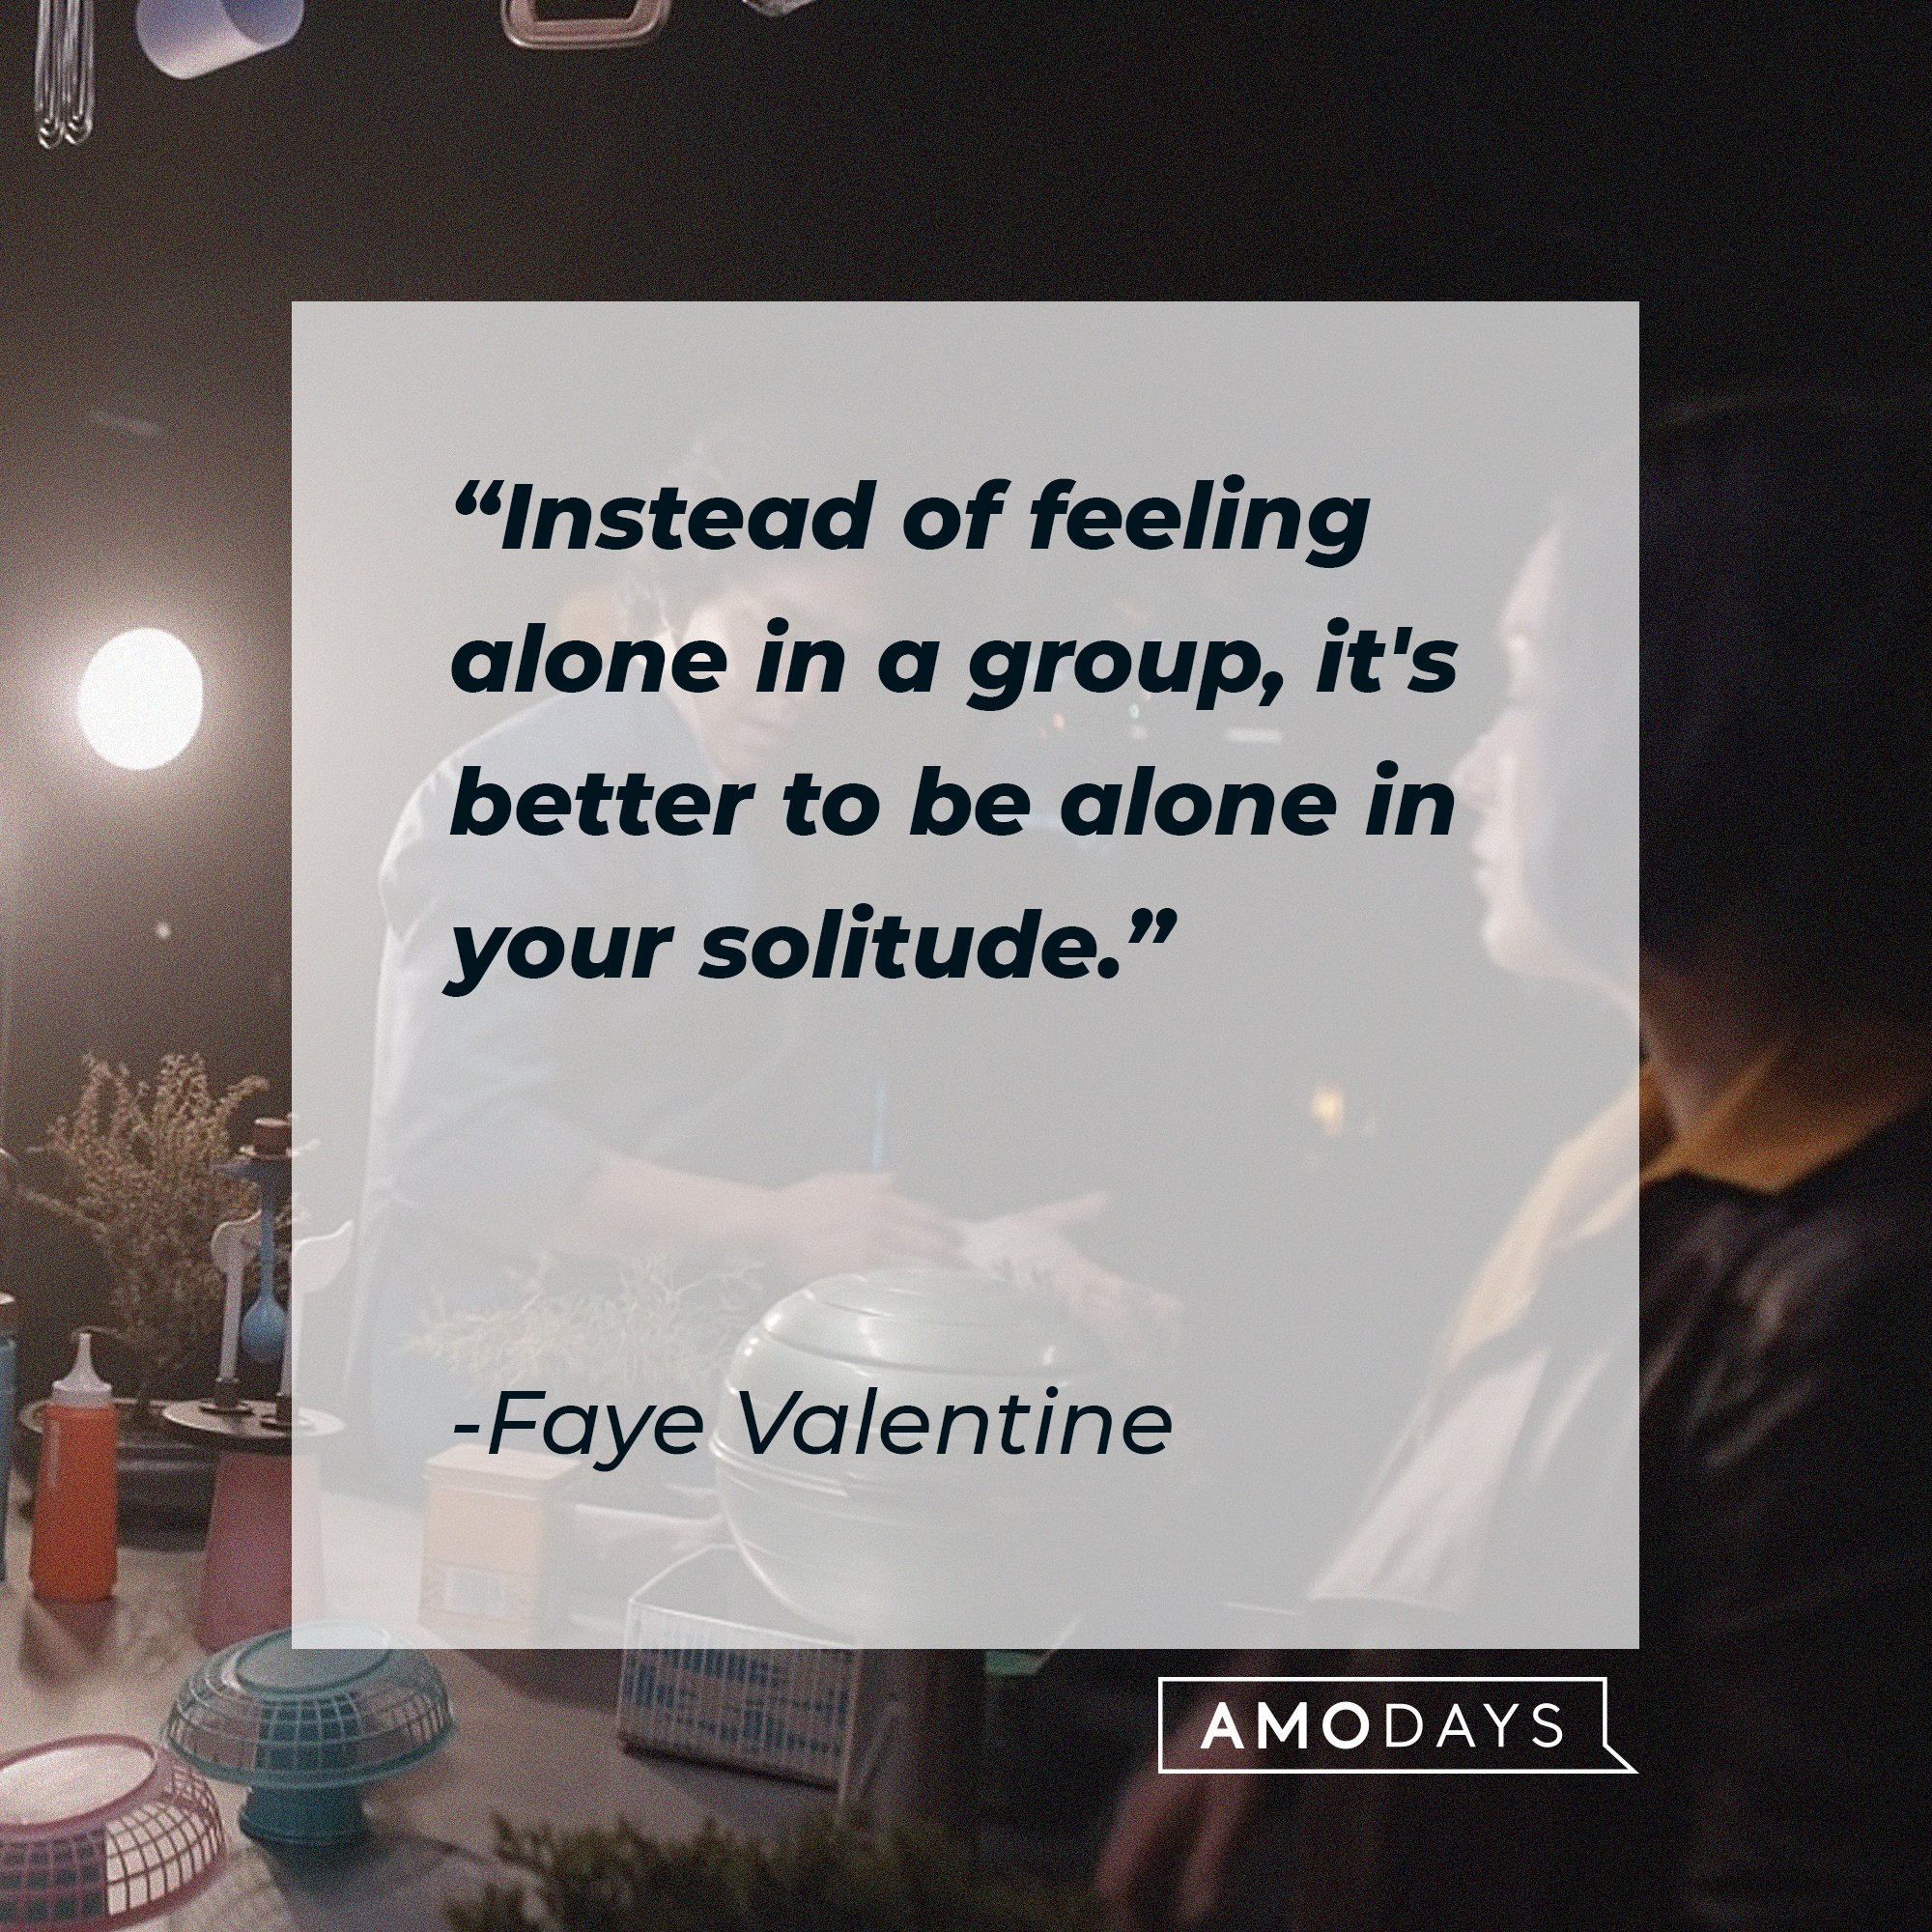  Faye Valentine’s quote: "Instead of feeling alone in a group, it's better to be alone in your solitude." | Image: AmoDays